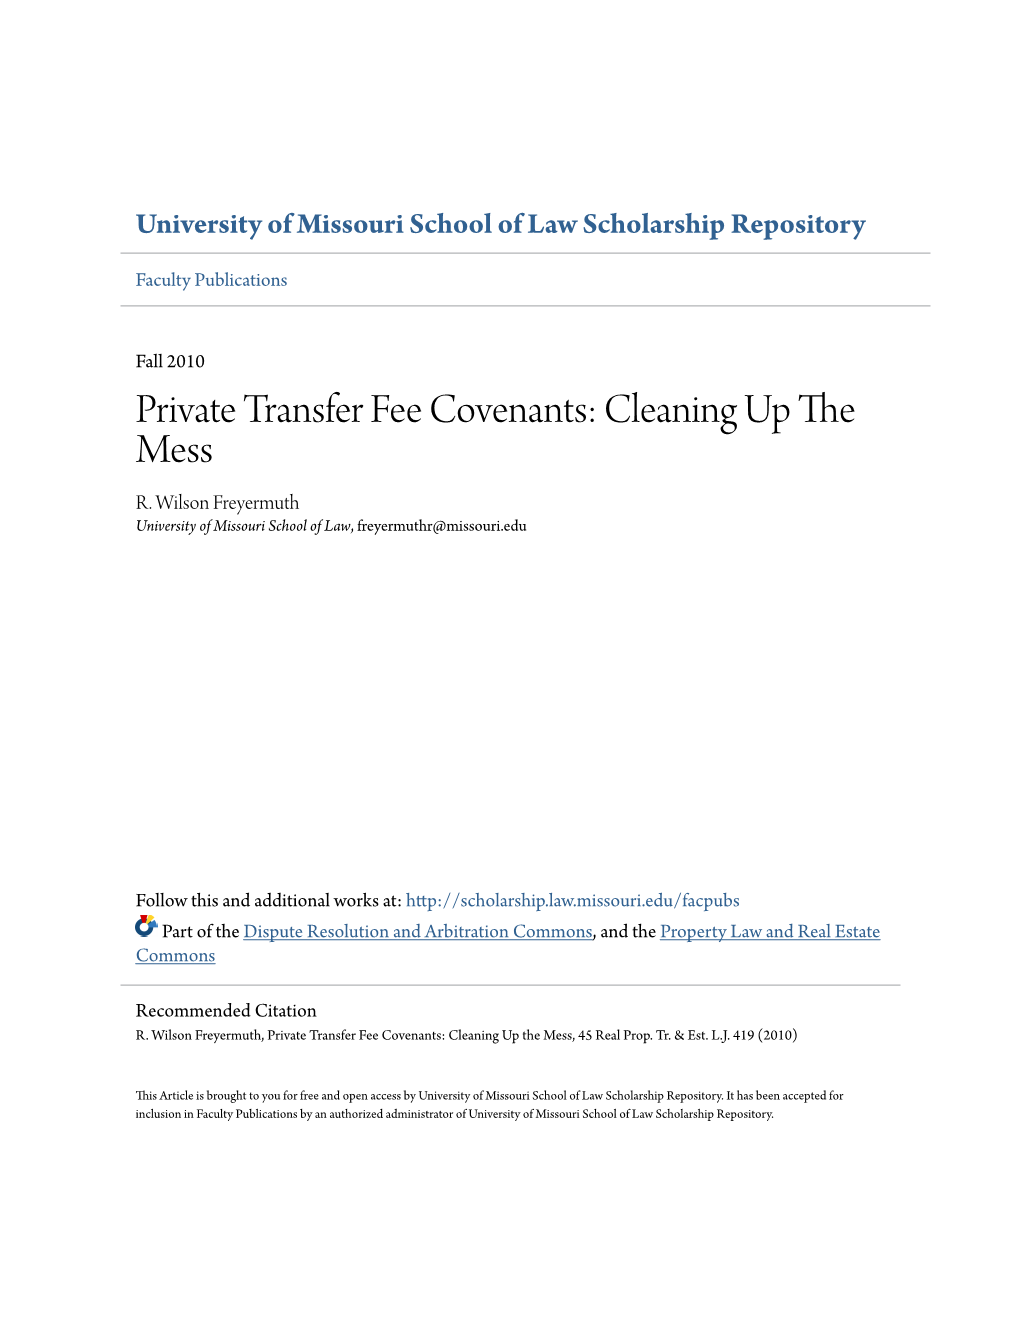 Private Transfer Fee Covenants: Cleaning up the Mess R